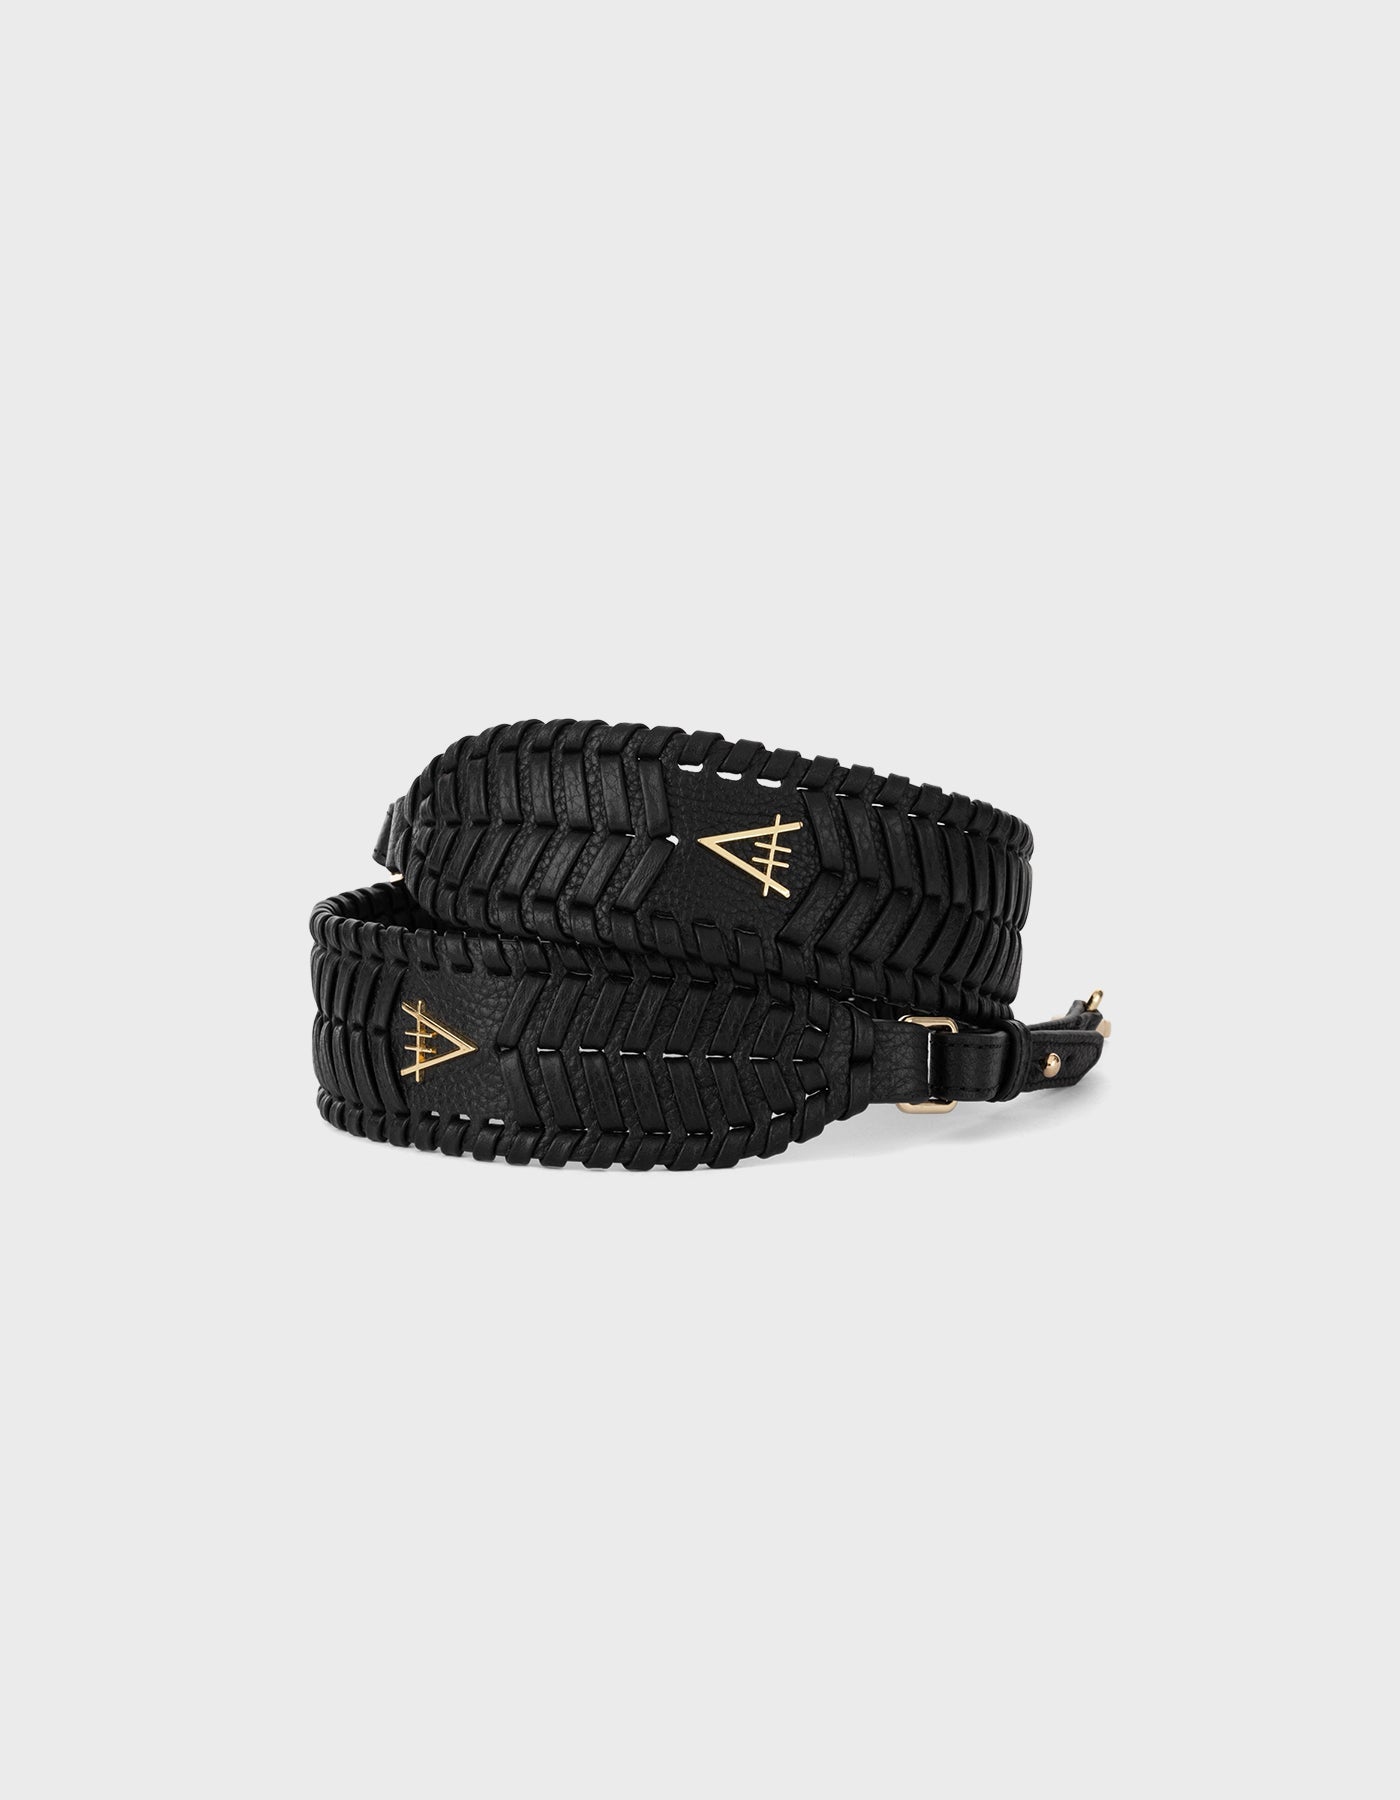 Hiva Atelier | Woven Detail Leather Strap Black | Beautiful and Versatile